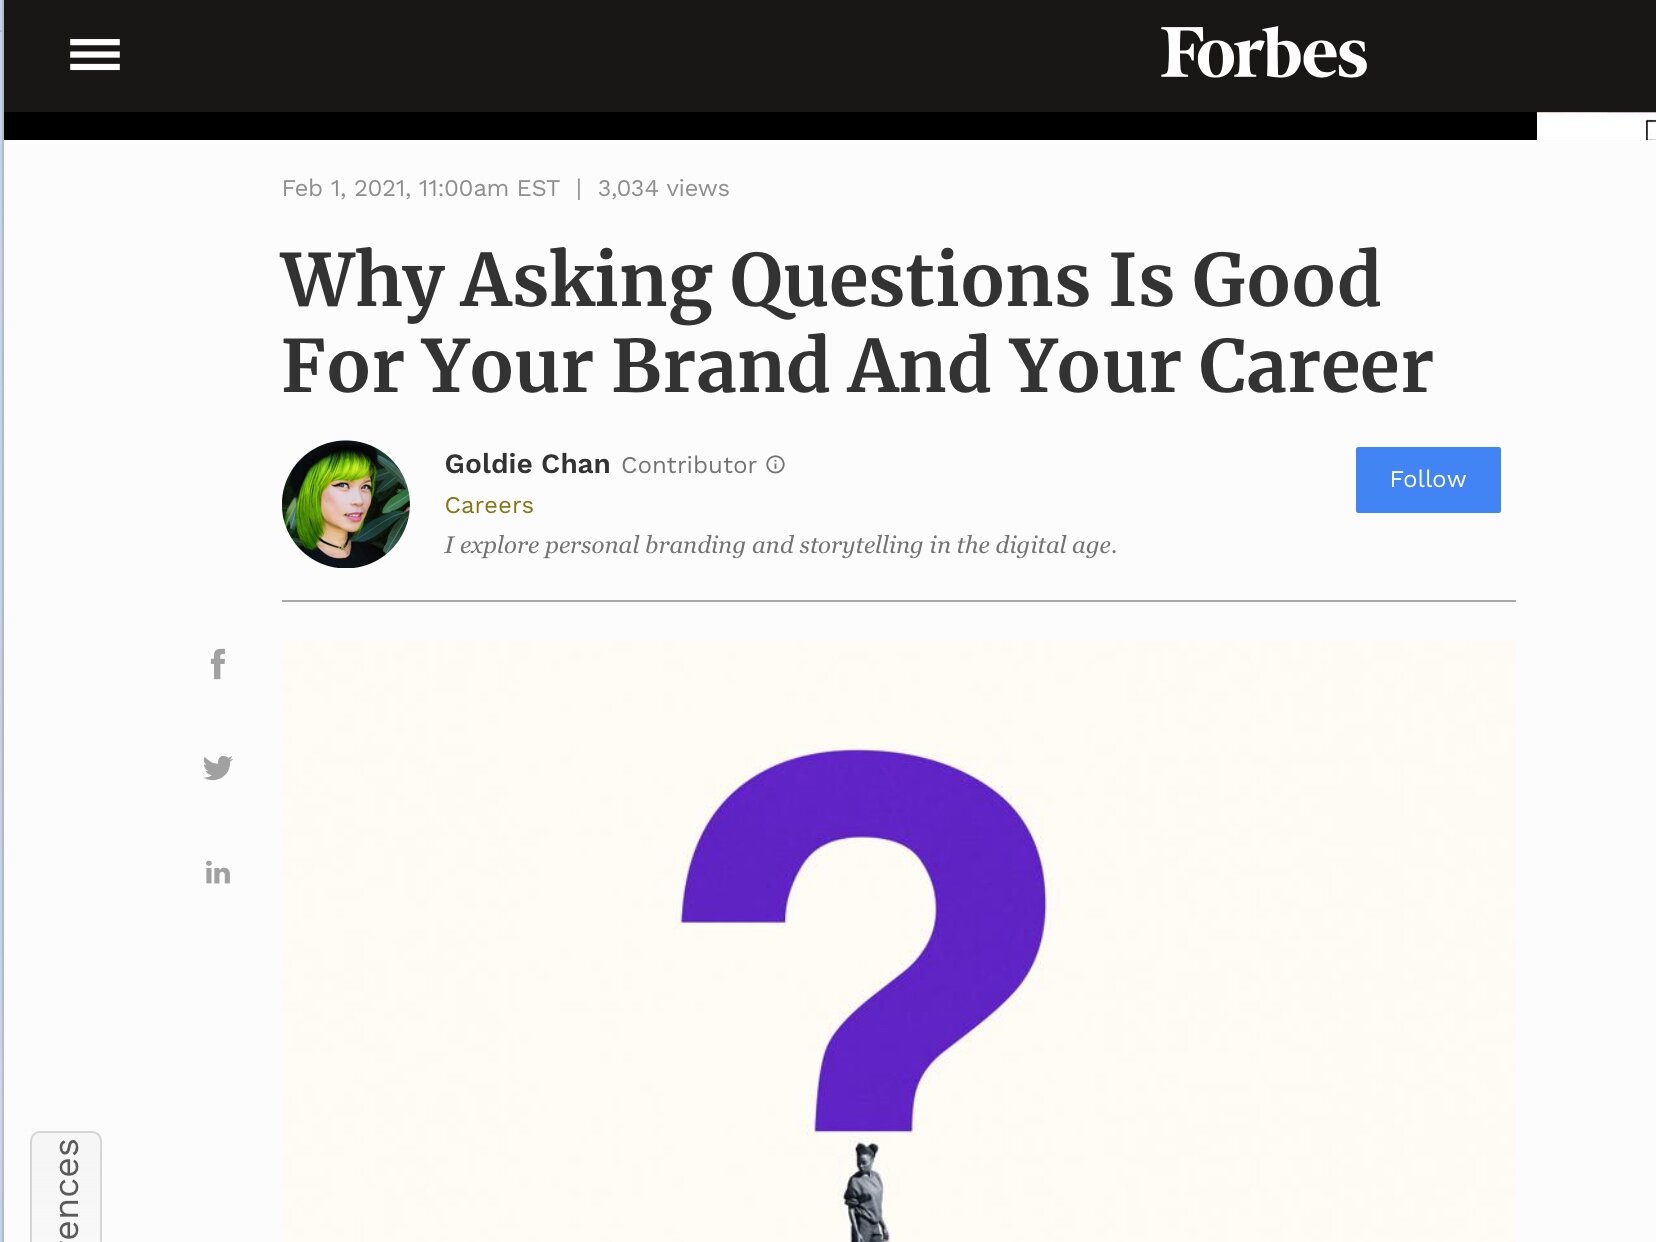 FORBES: Why Asking Questions Is Good For Your Brand And Your Career